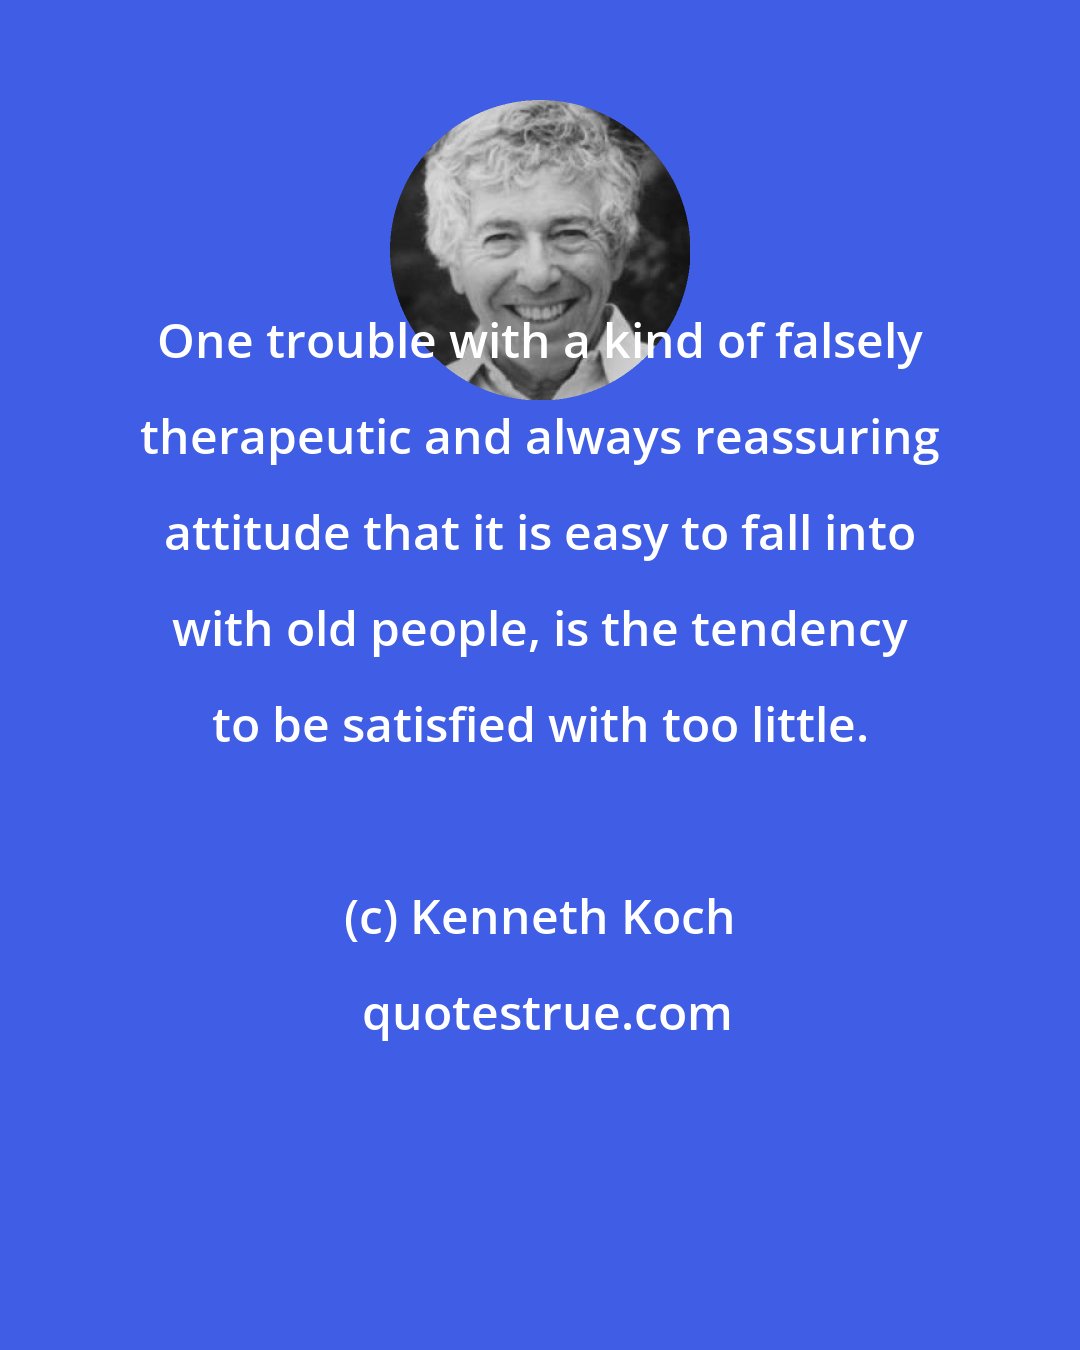 Kenneth Koch: One trouble with a kind of falsely therapeutic and always reassuring attitude that it is easy to fall into with old people, is the tendency to be satisfied with too little.